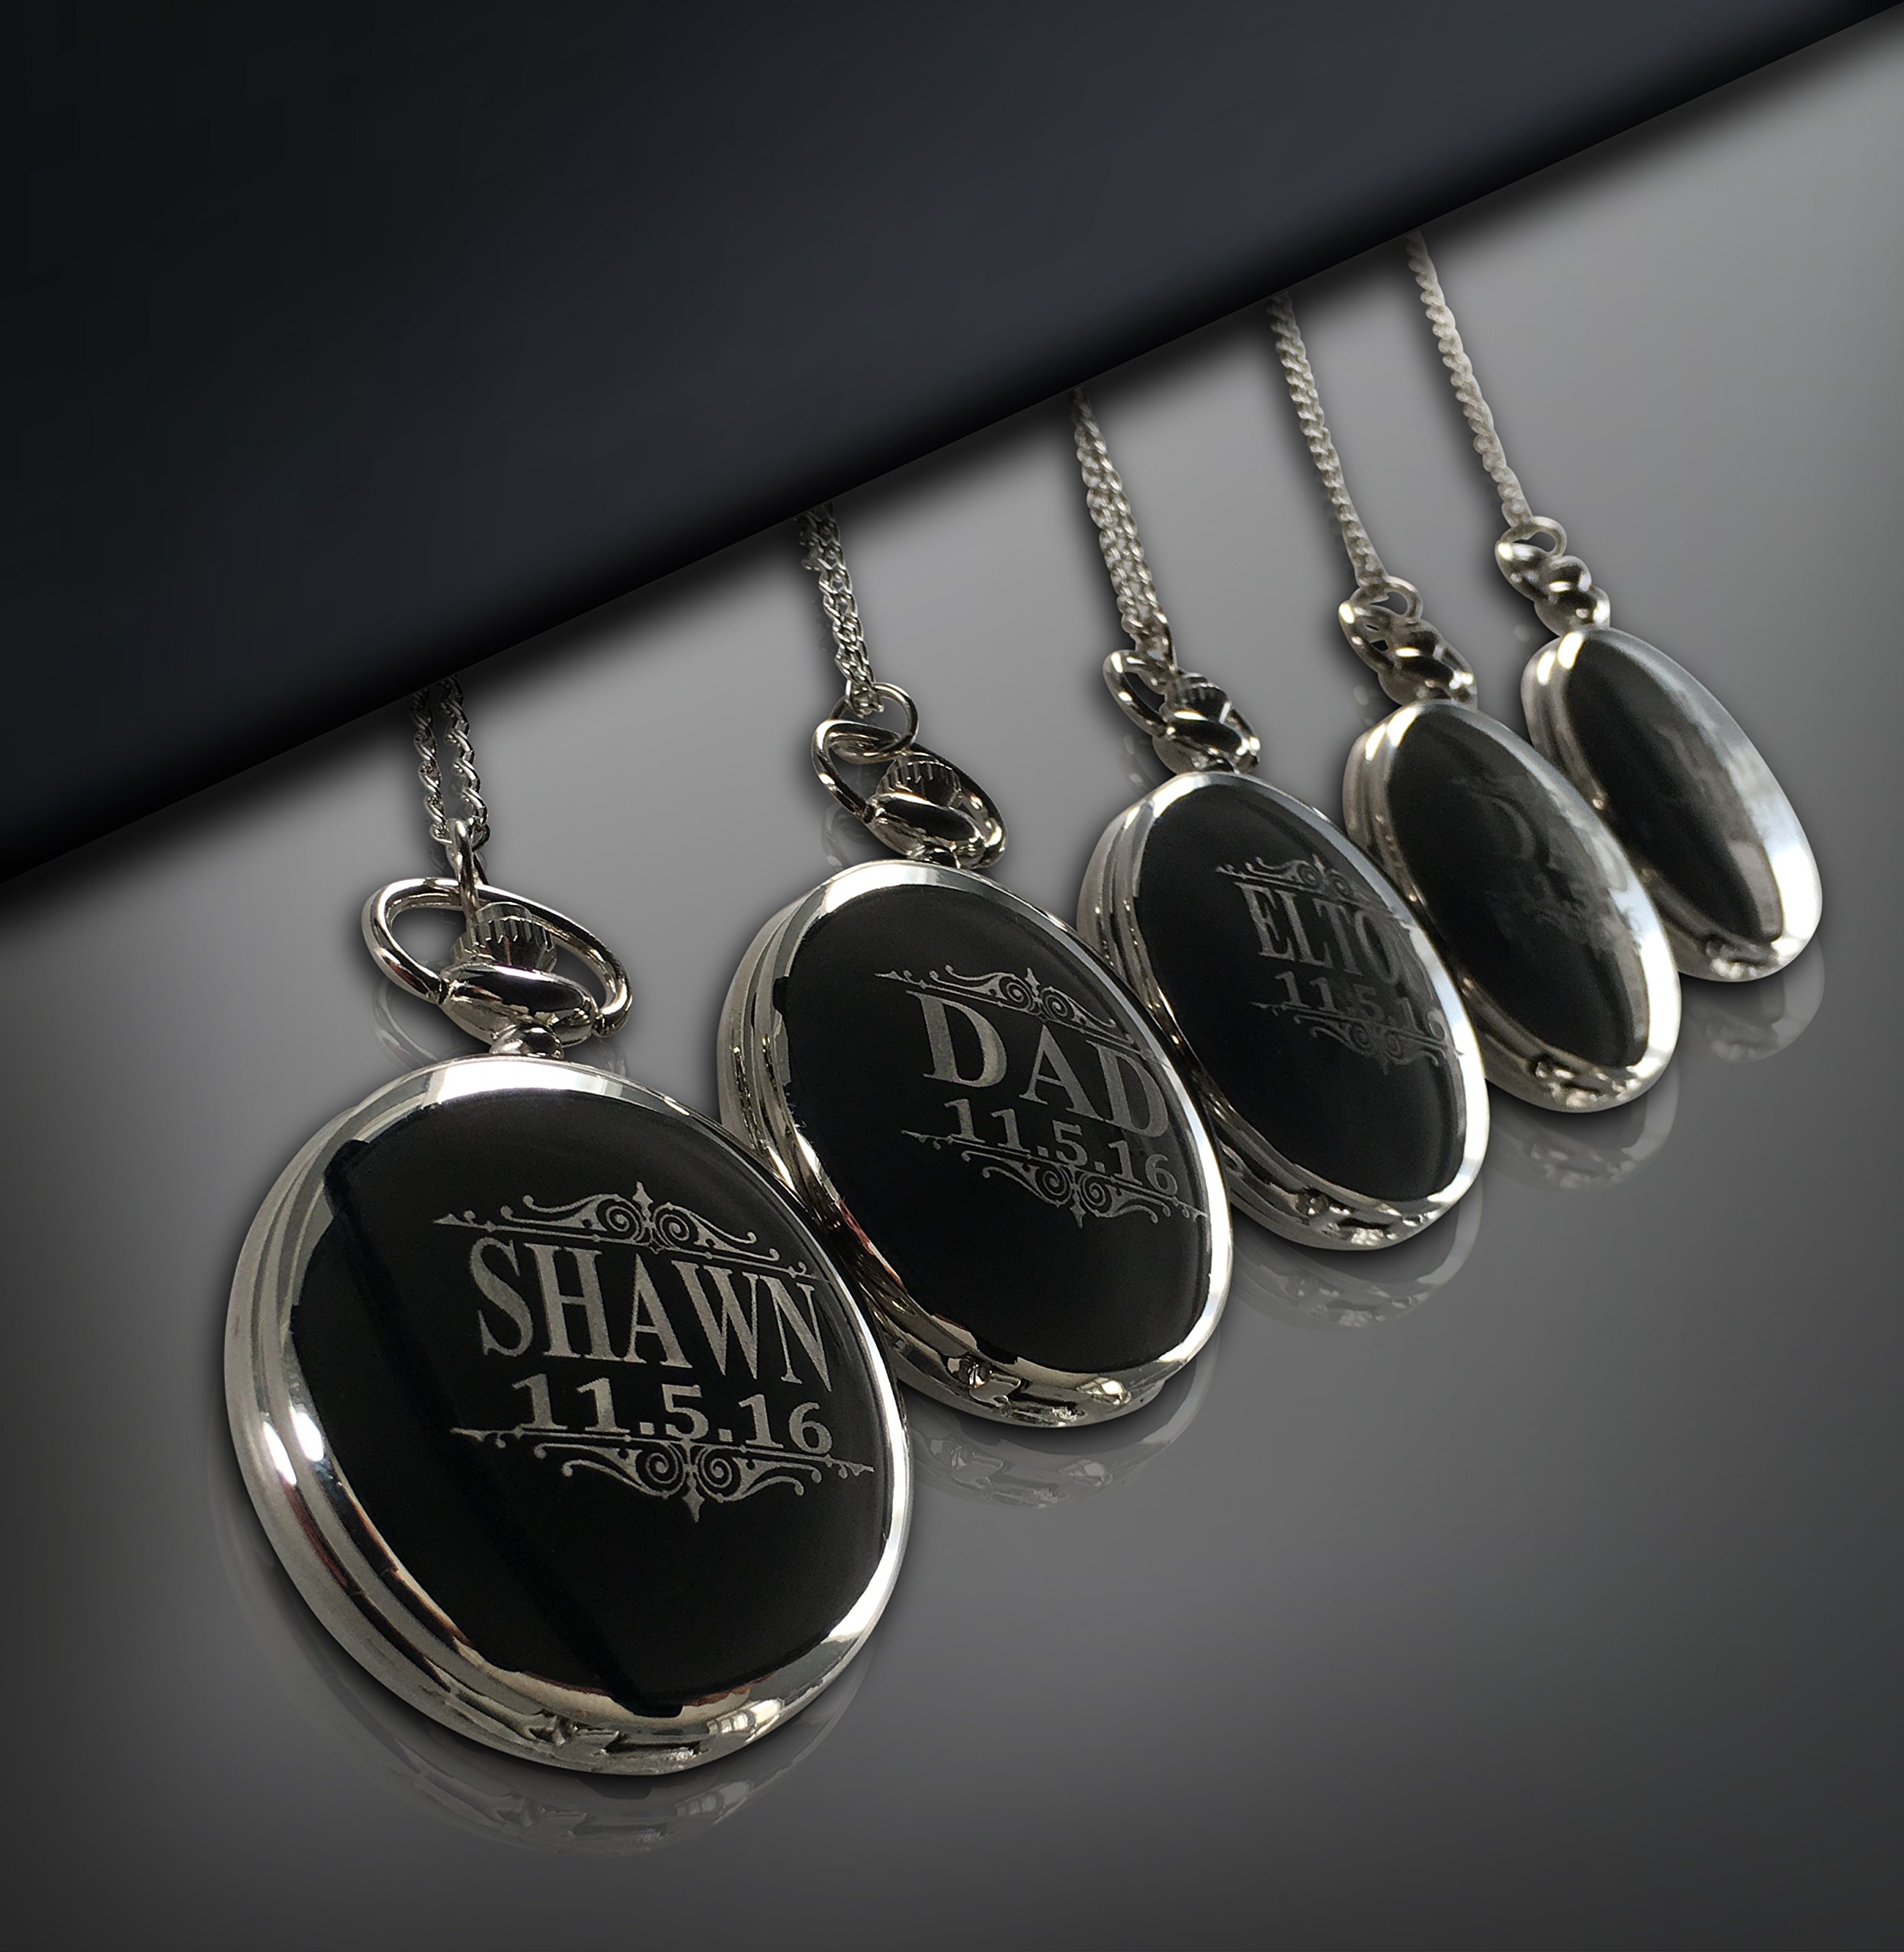 Personalized Pocket Watches, Set of 10 Groomsmen Wedding Unique Gifts, Chain, Box and Engraving Included, Comes in 4 Colors